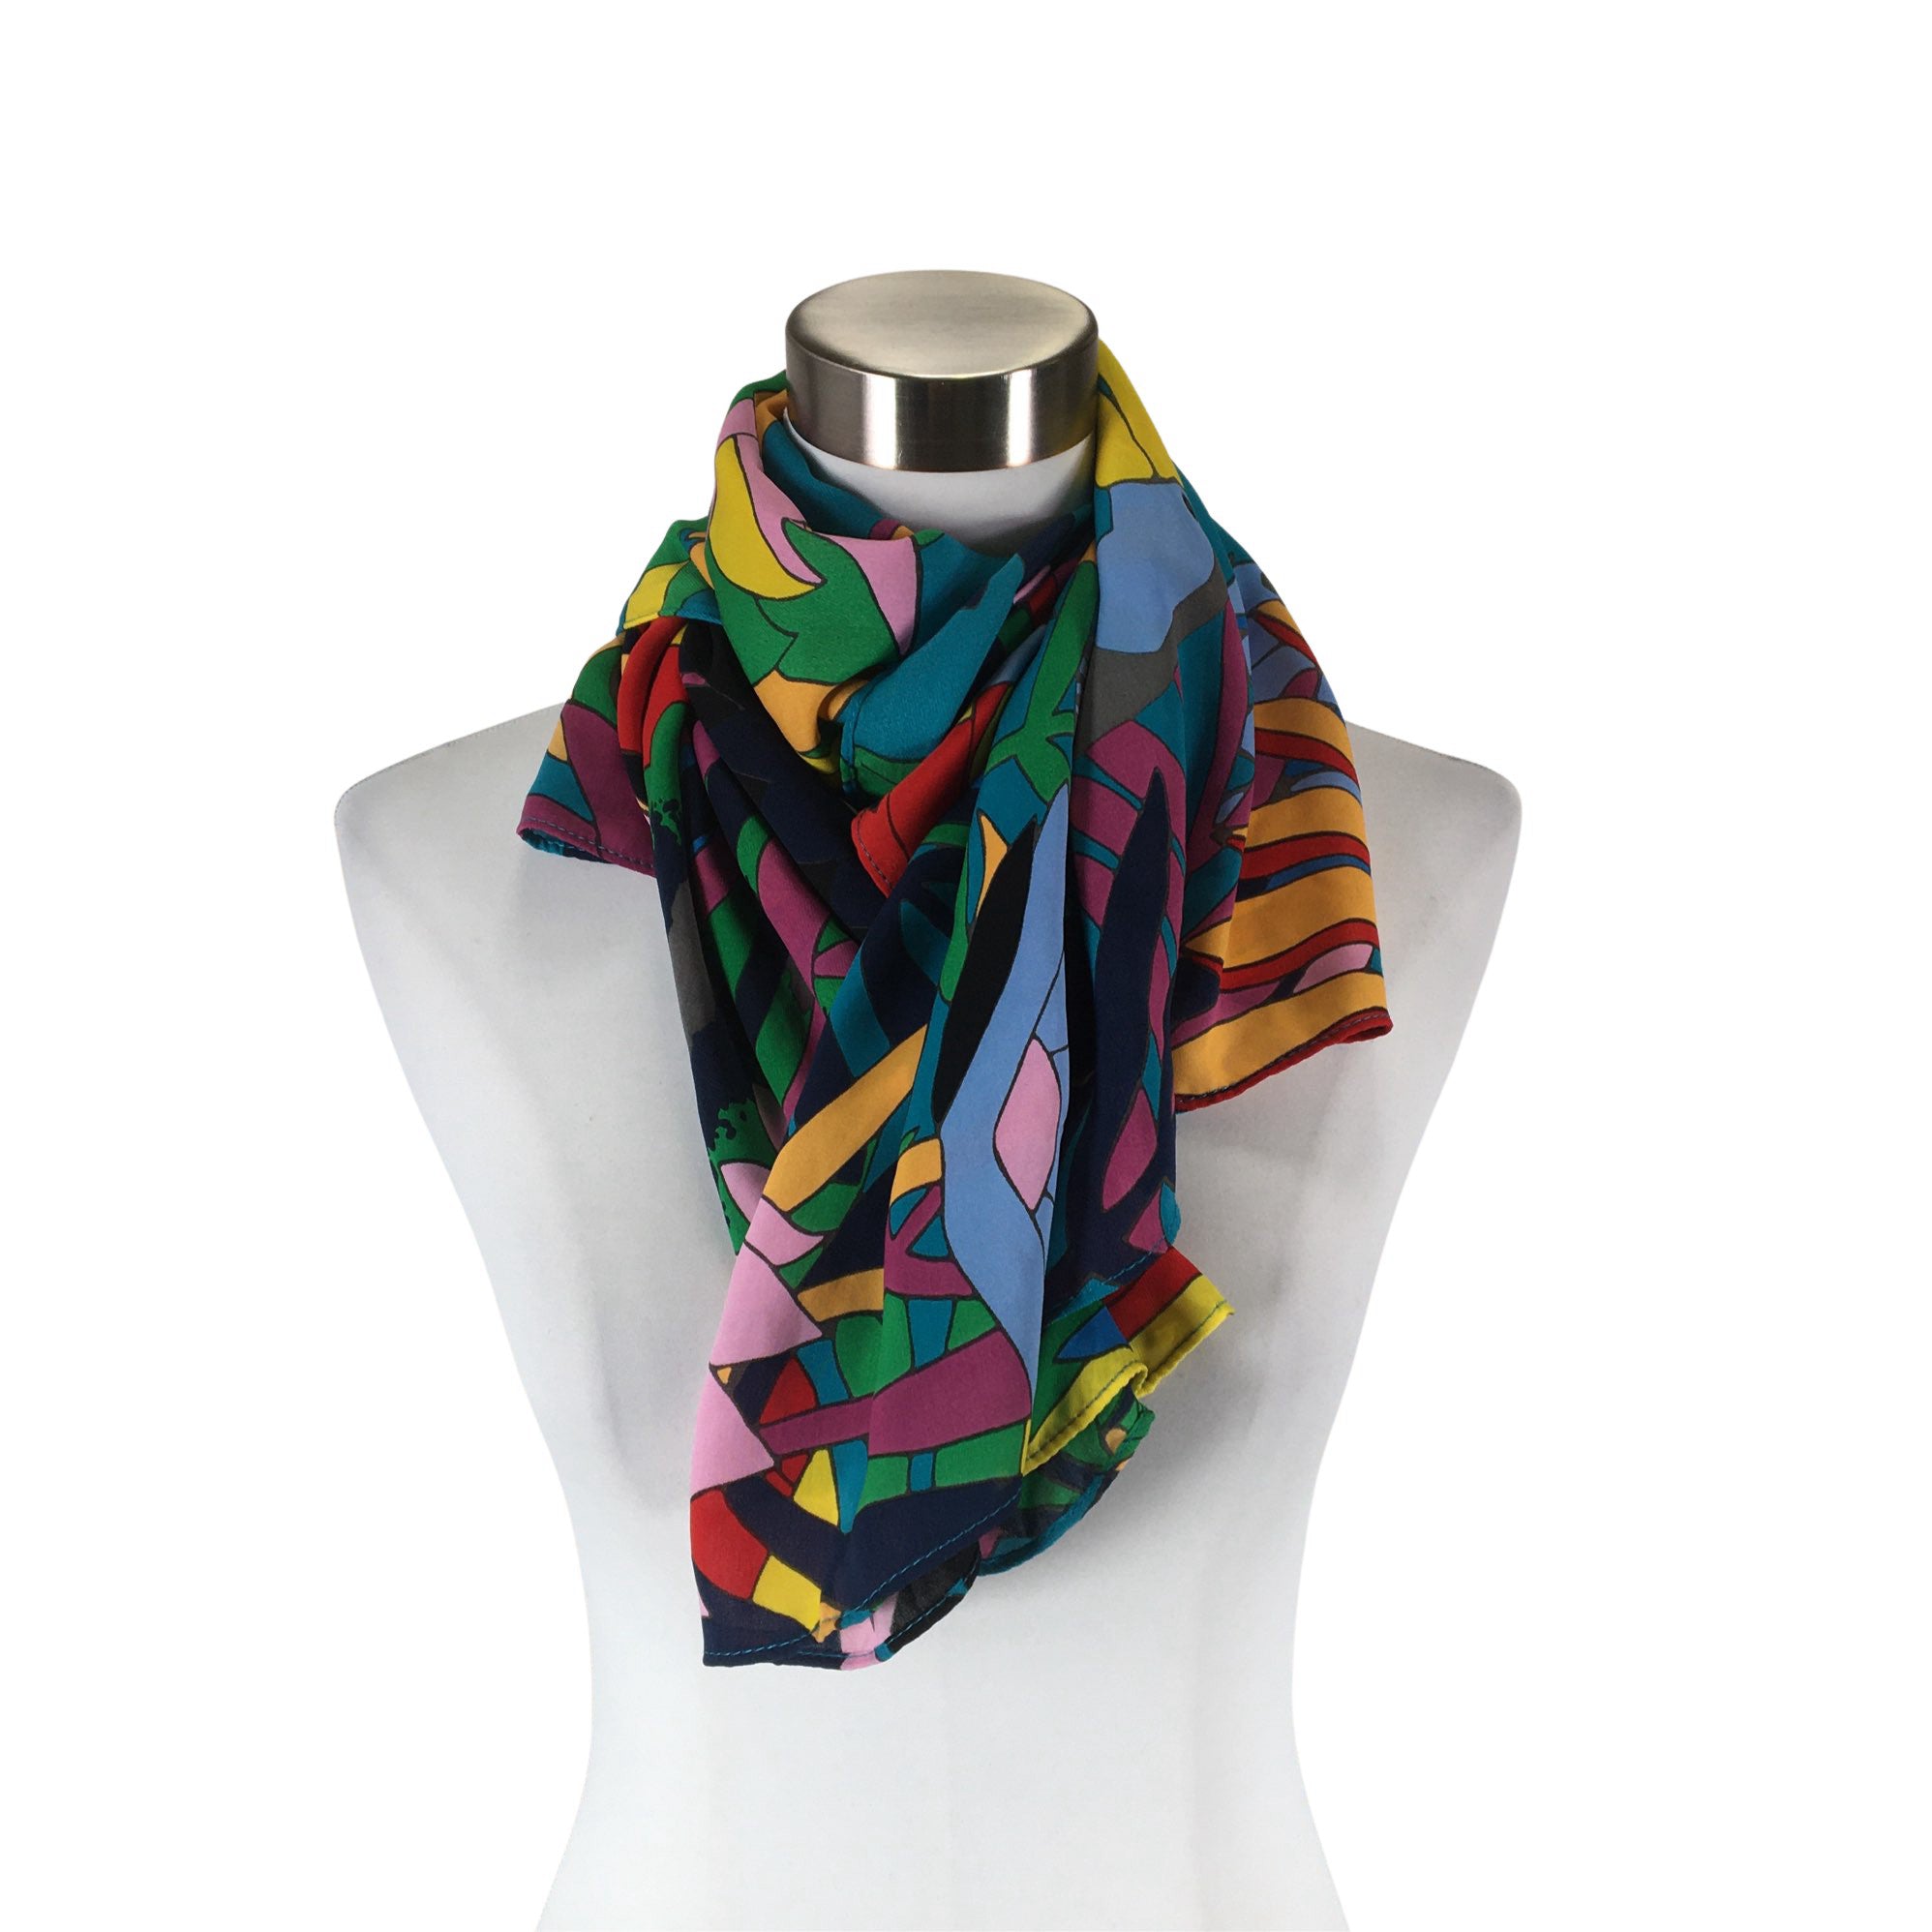 Scarf Bimba y Lola Multicolour in Other - 14217106